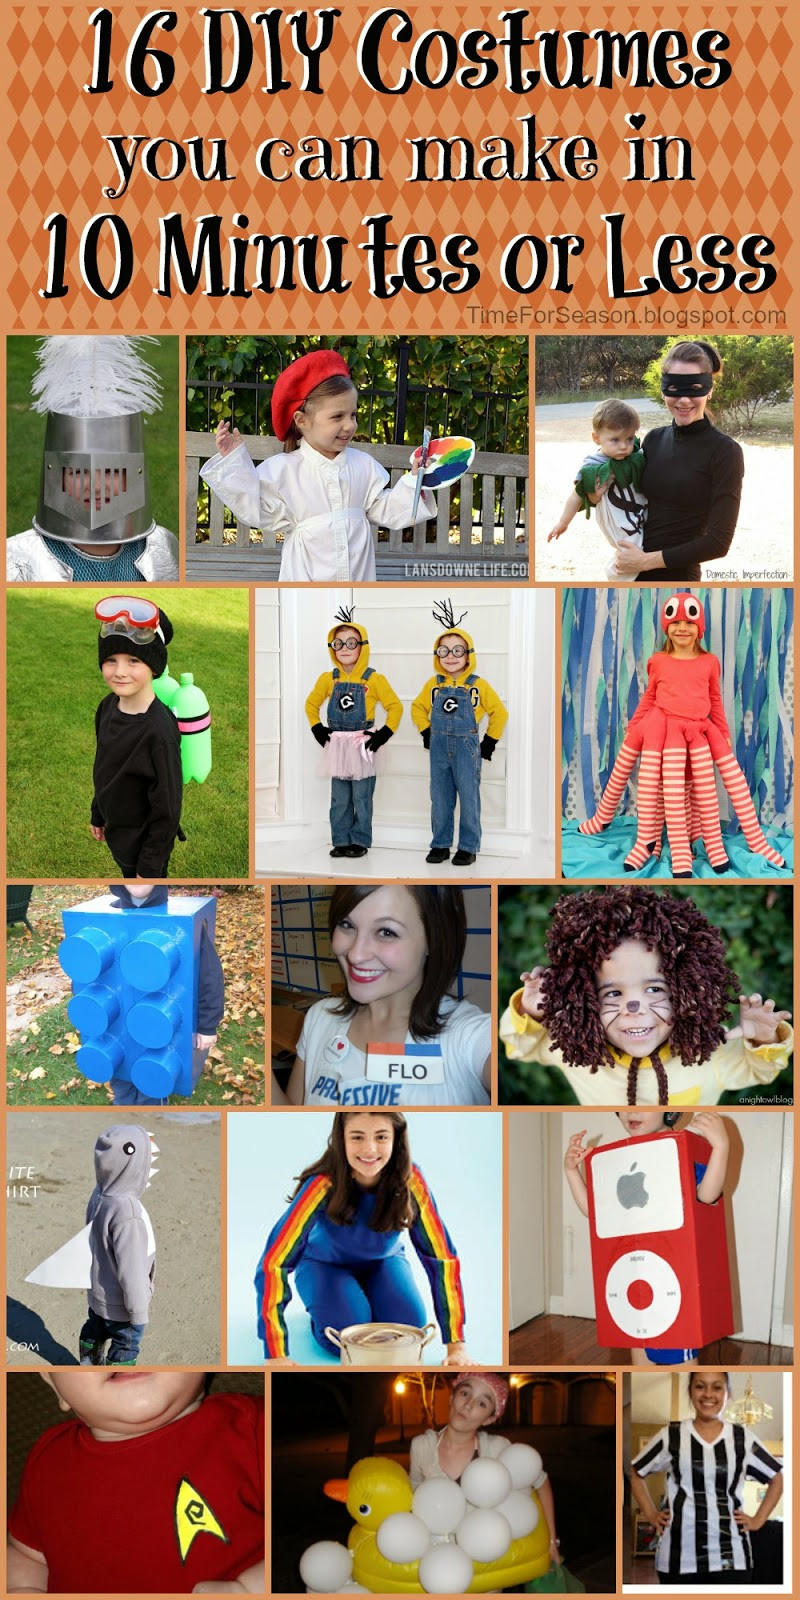 Quick DIY Costumes
 16 DIY Costumes in 10 Minutes or Less